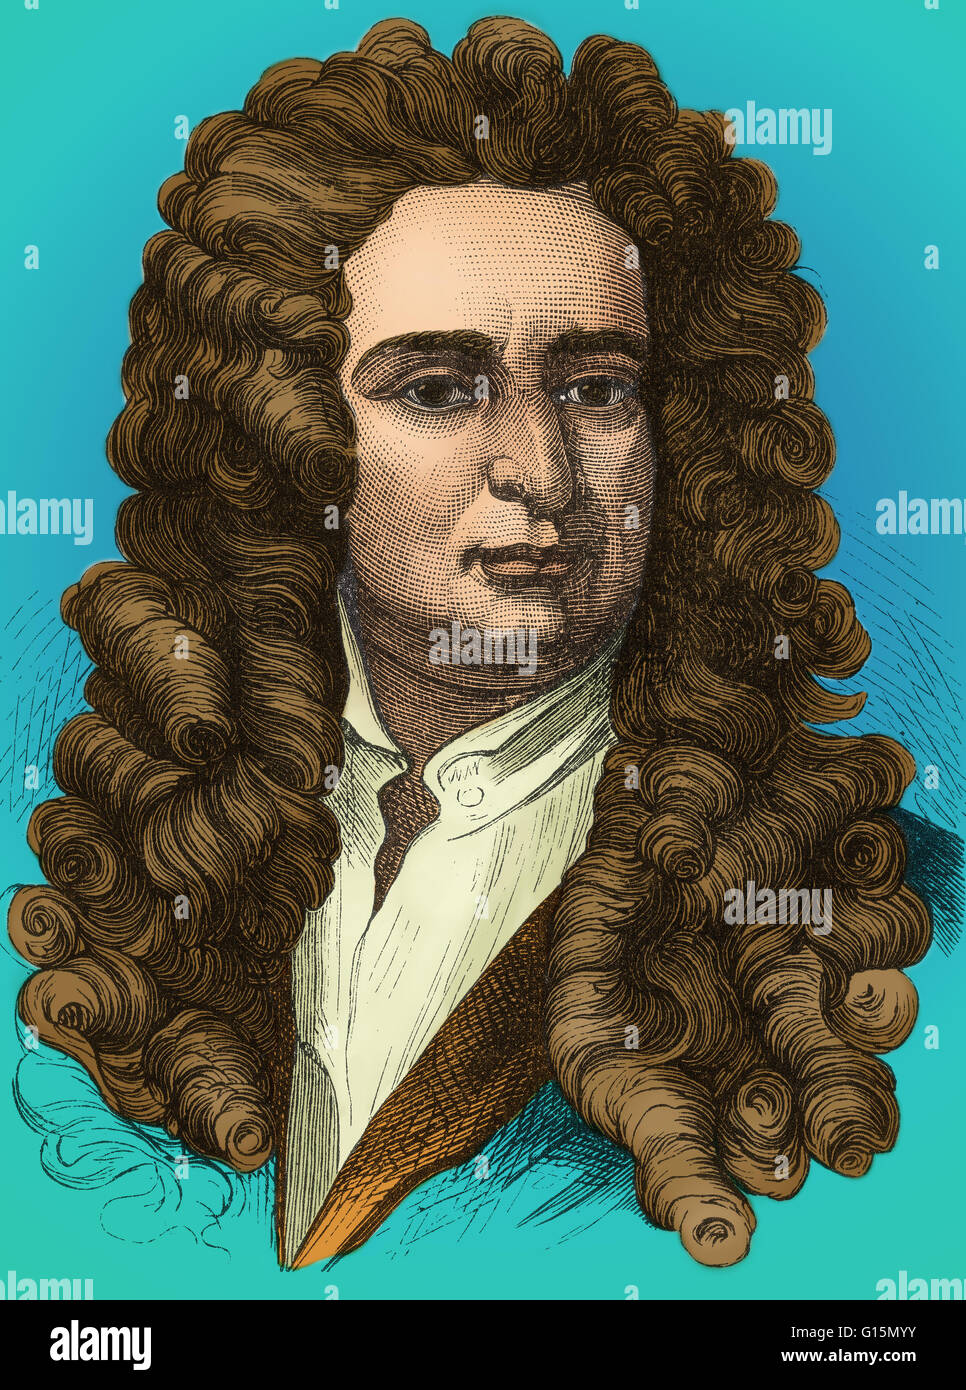 Isaac Newton (December 25, 1642 - March 20, 1727) was an English physicist, mathematician, astronomer, natural philosopher, alchemist, and theologian. His monograph Philosophae Naturalis Principia Mathematica, published in 1687, lays the foundations for m Stock Photo